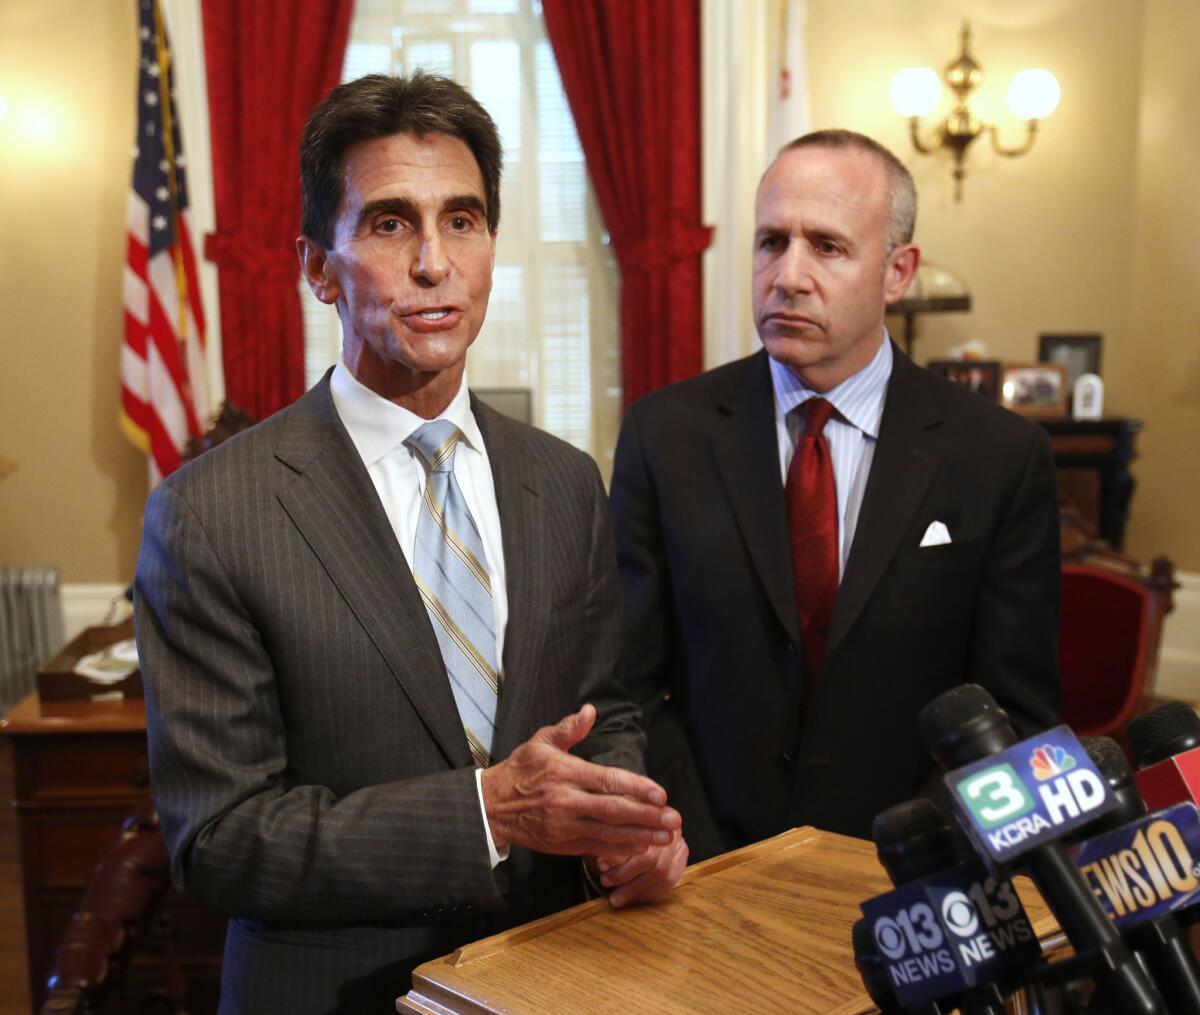 State Sen. Mark Leno, D-San Francisco, left, and Senate President Pro Tem Darrell Steinberg, D-Sacramento, talk to reporters earlier this summer. They have co-authored a resolution seeking sanctions against Russia.